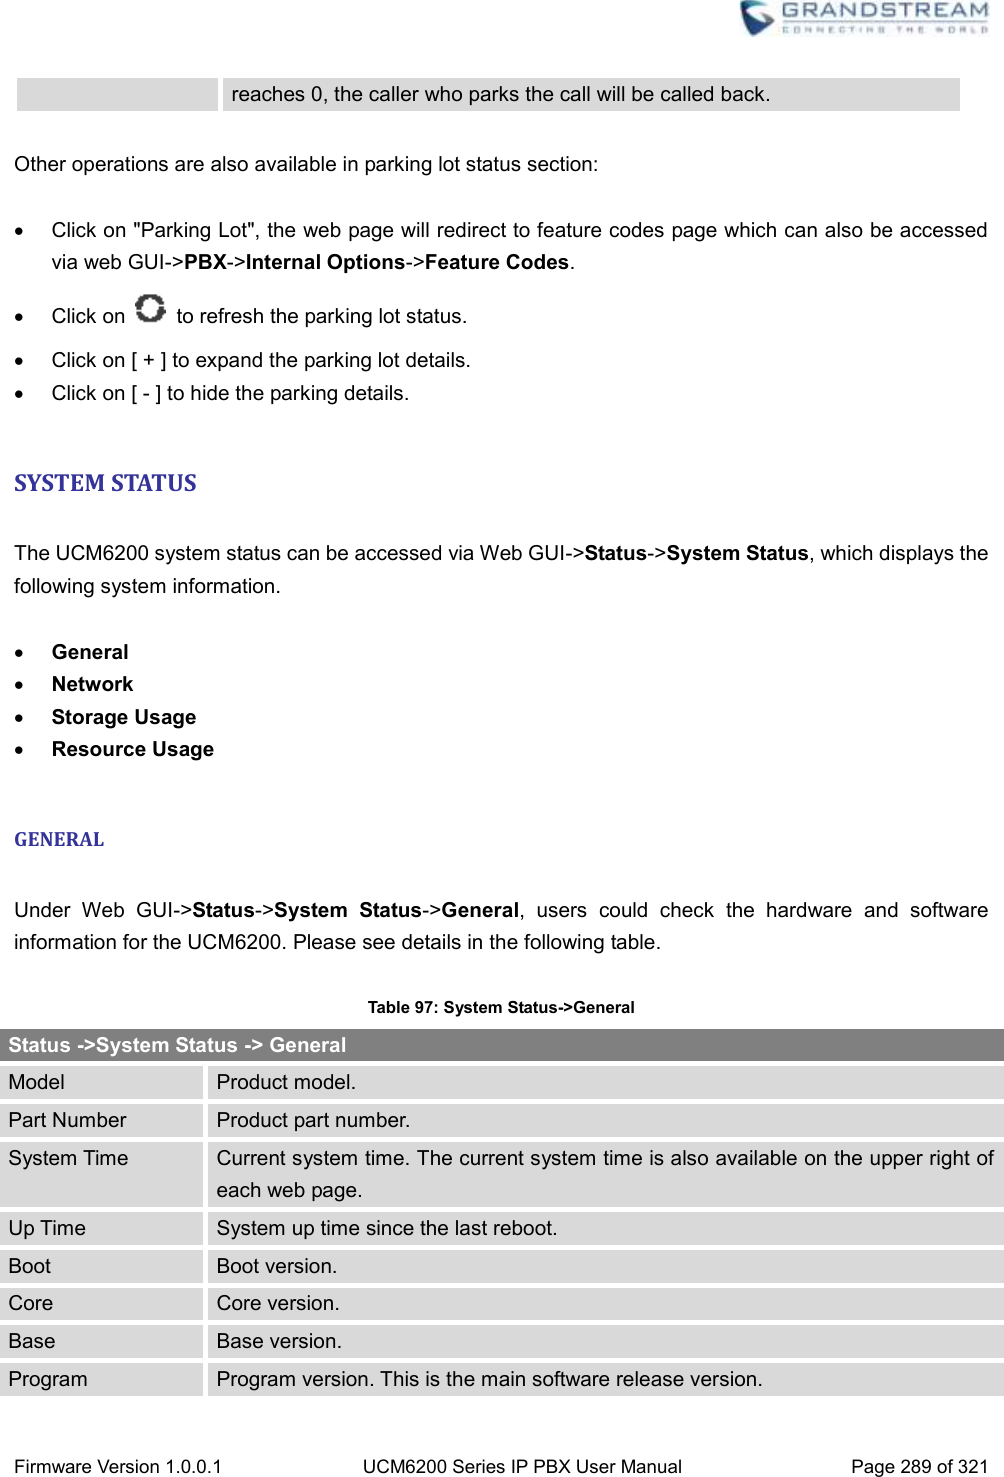  Firmware Version 1.0.0.1 UCM6200 Series IP PBX User Manual Page 289 of 321    reaches 0, the caller who parks the call will be called back.  Other operations are also available in parking lot status section:    Click on &quot;Parking Lot&quot;, the web page will redirect to feature codes page which can also be accessed via web GUI-&gt;PBX-&gt;Internal Options-&gt;Feature Codes.   Click on    to refresh the parking lot status.   Click on [ + ] to expand the parking lot details.   Click on [ - ] to hide the parking details.  SYSTEM STATUS  The UCM6200 system status can be accessed via Web GUI-&gt;Status-&gt;System Status, which displays the following system information.   General  Network  Storage Usage  Resource Usage  GENERAL  Under  Web  GUI-&gt;Status-&gt;System  Status-&gt;General,  users  could  check  the  hardware  and  software information for the UCM6200. Please see details in the following table.  Table 97: System Status-&gt;General Status -&gt;System Status -&gt; General Model Product model. Part Number Product part number. System Time Current system time. The current system time is also available on the upper right of each web page. Up Time System up time since the last reboot. Boot Boot version. Core Core version. Base Base version. Program Program version. This is the main software release version. 